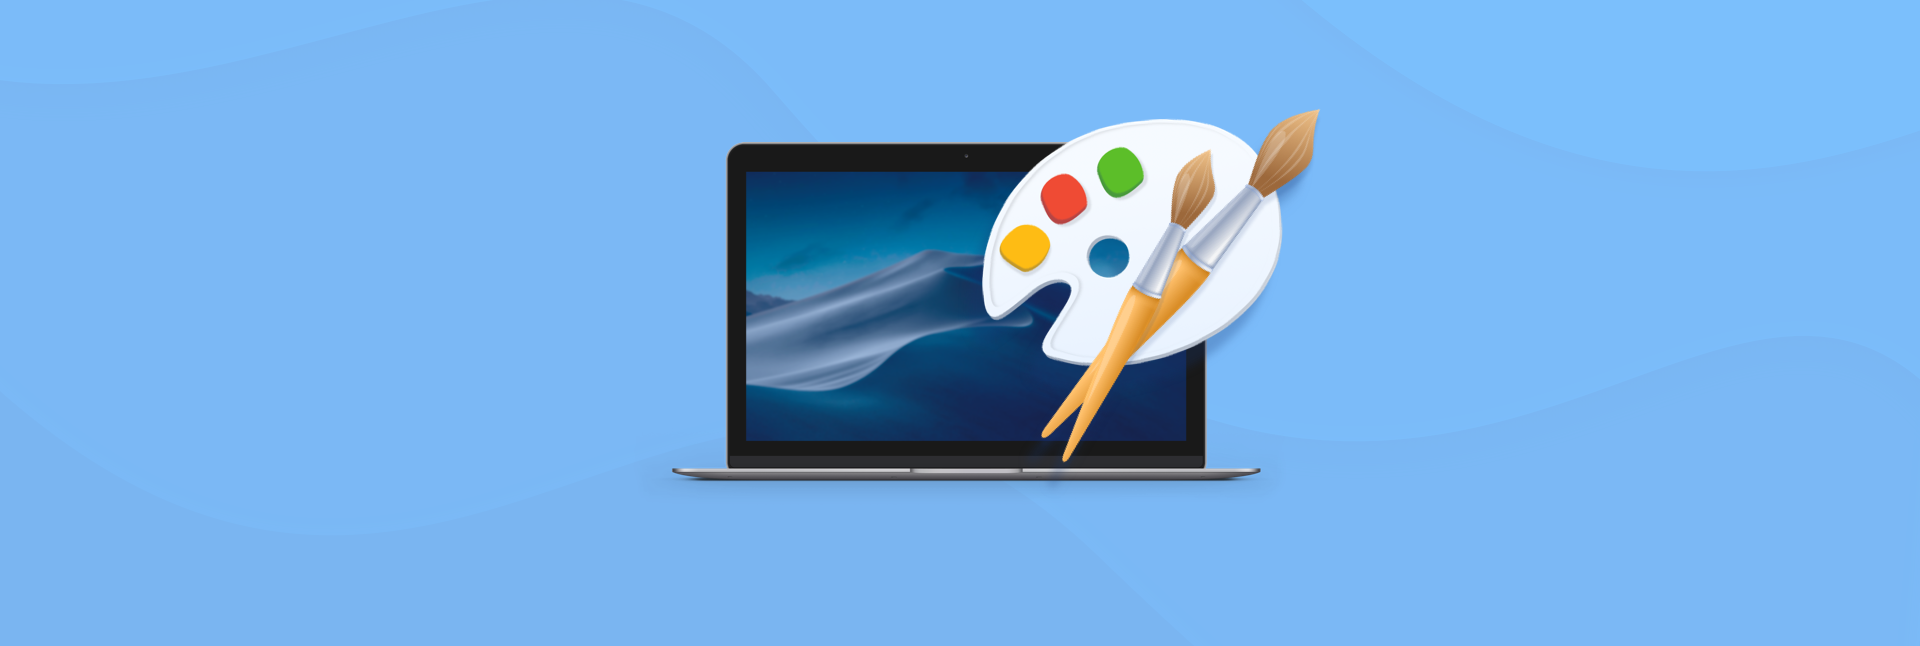 paint like software for mac